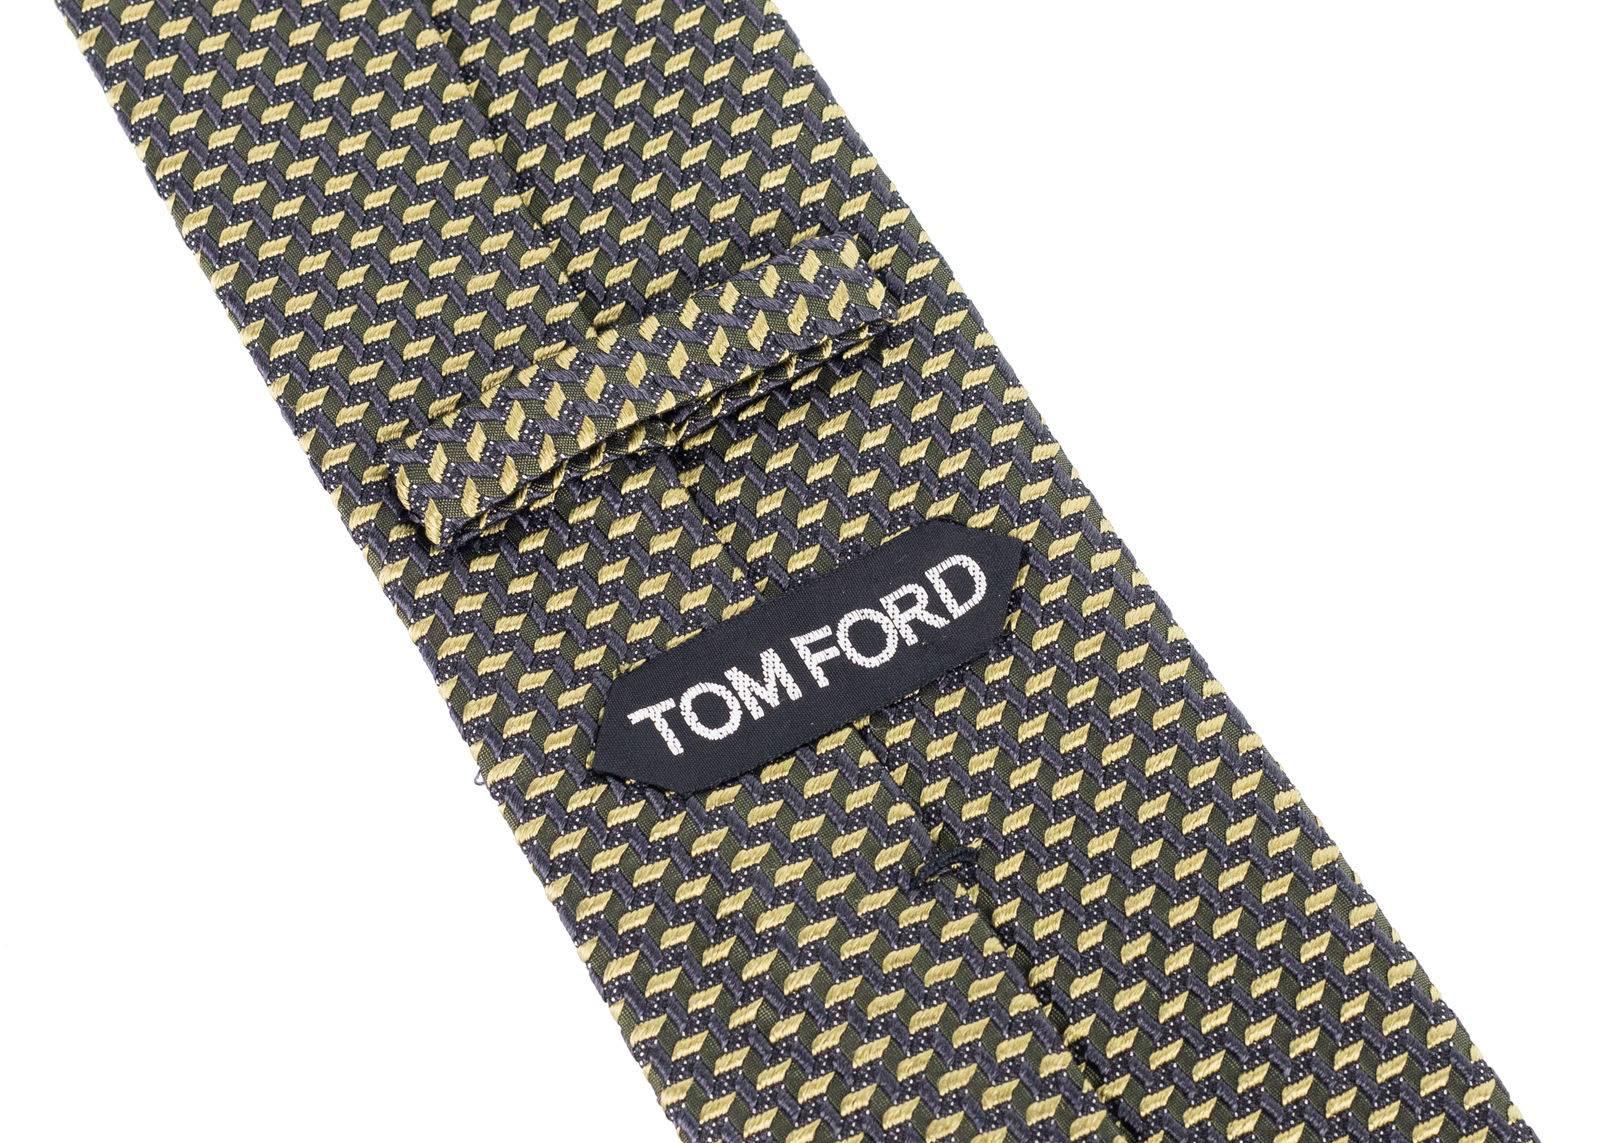 Italian luxury brand, Tom Ford, has crafted these gorgeous Silk Blend Tie for important special occasions and professional events. The tie is great to pair with your favorite solid color button down and blazers with your chosen pair or classic